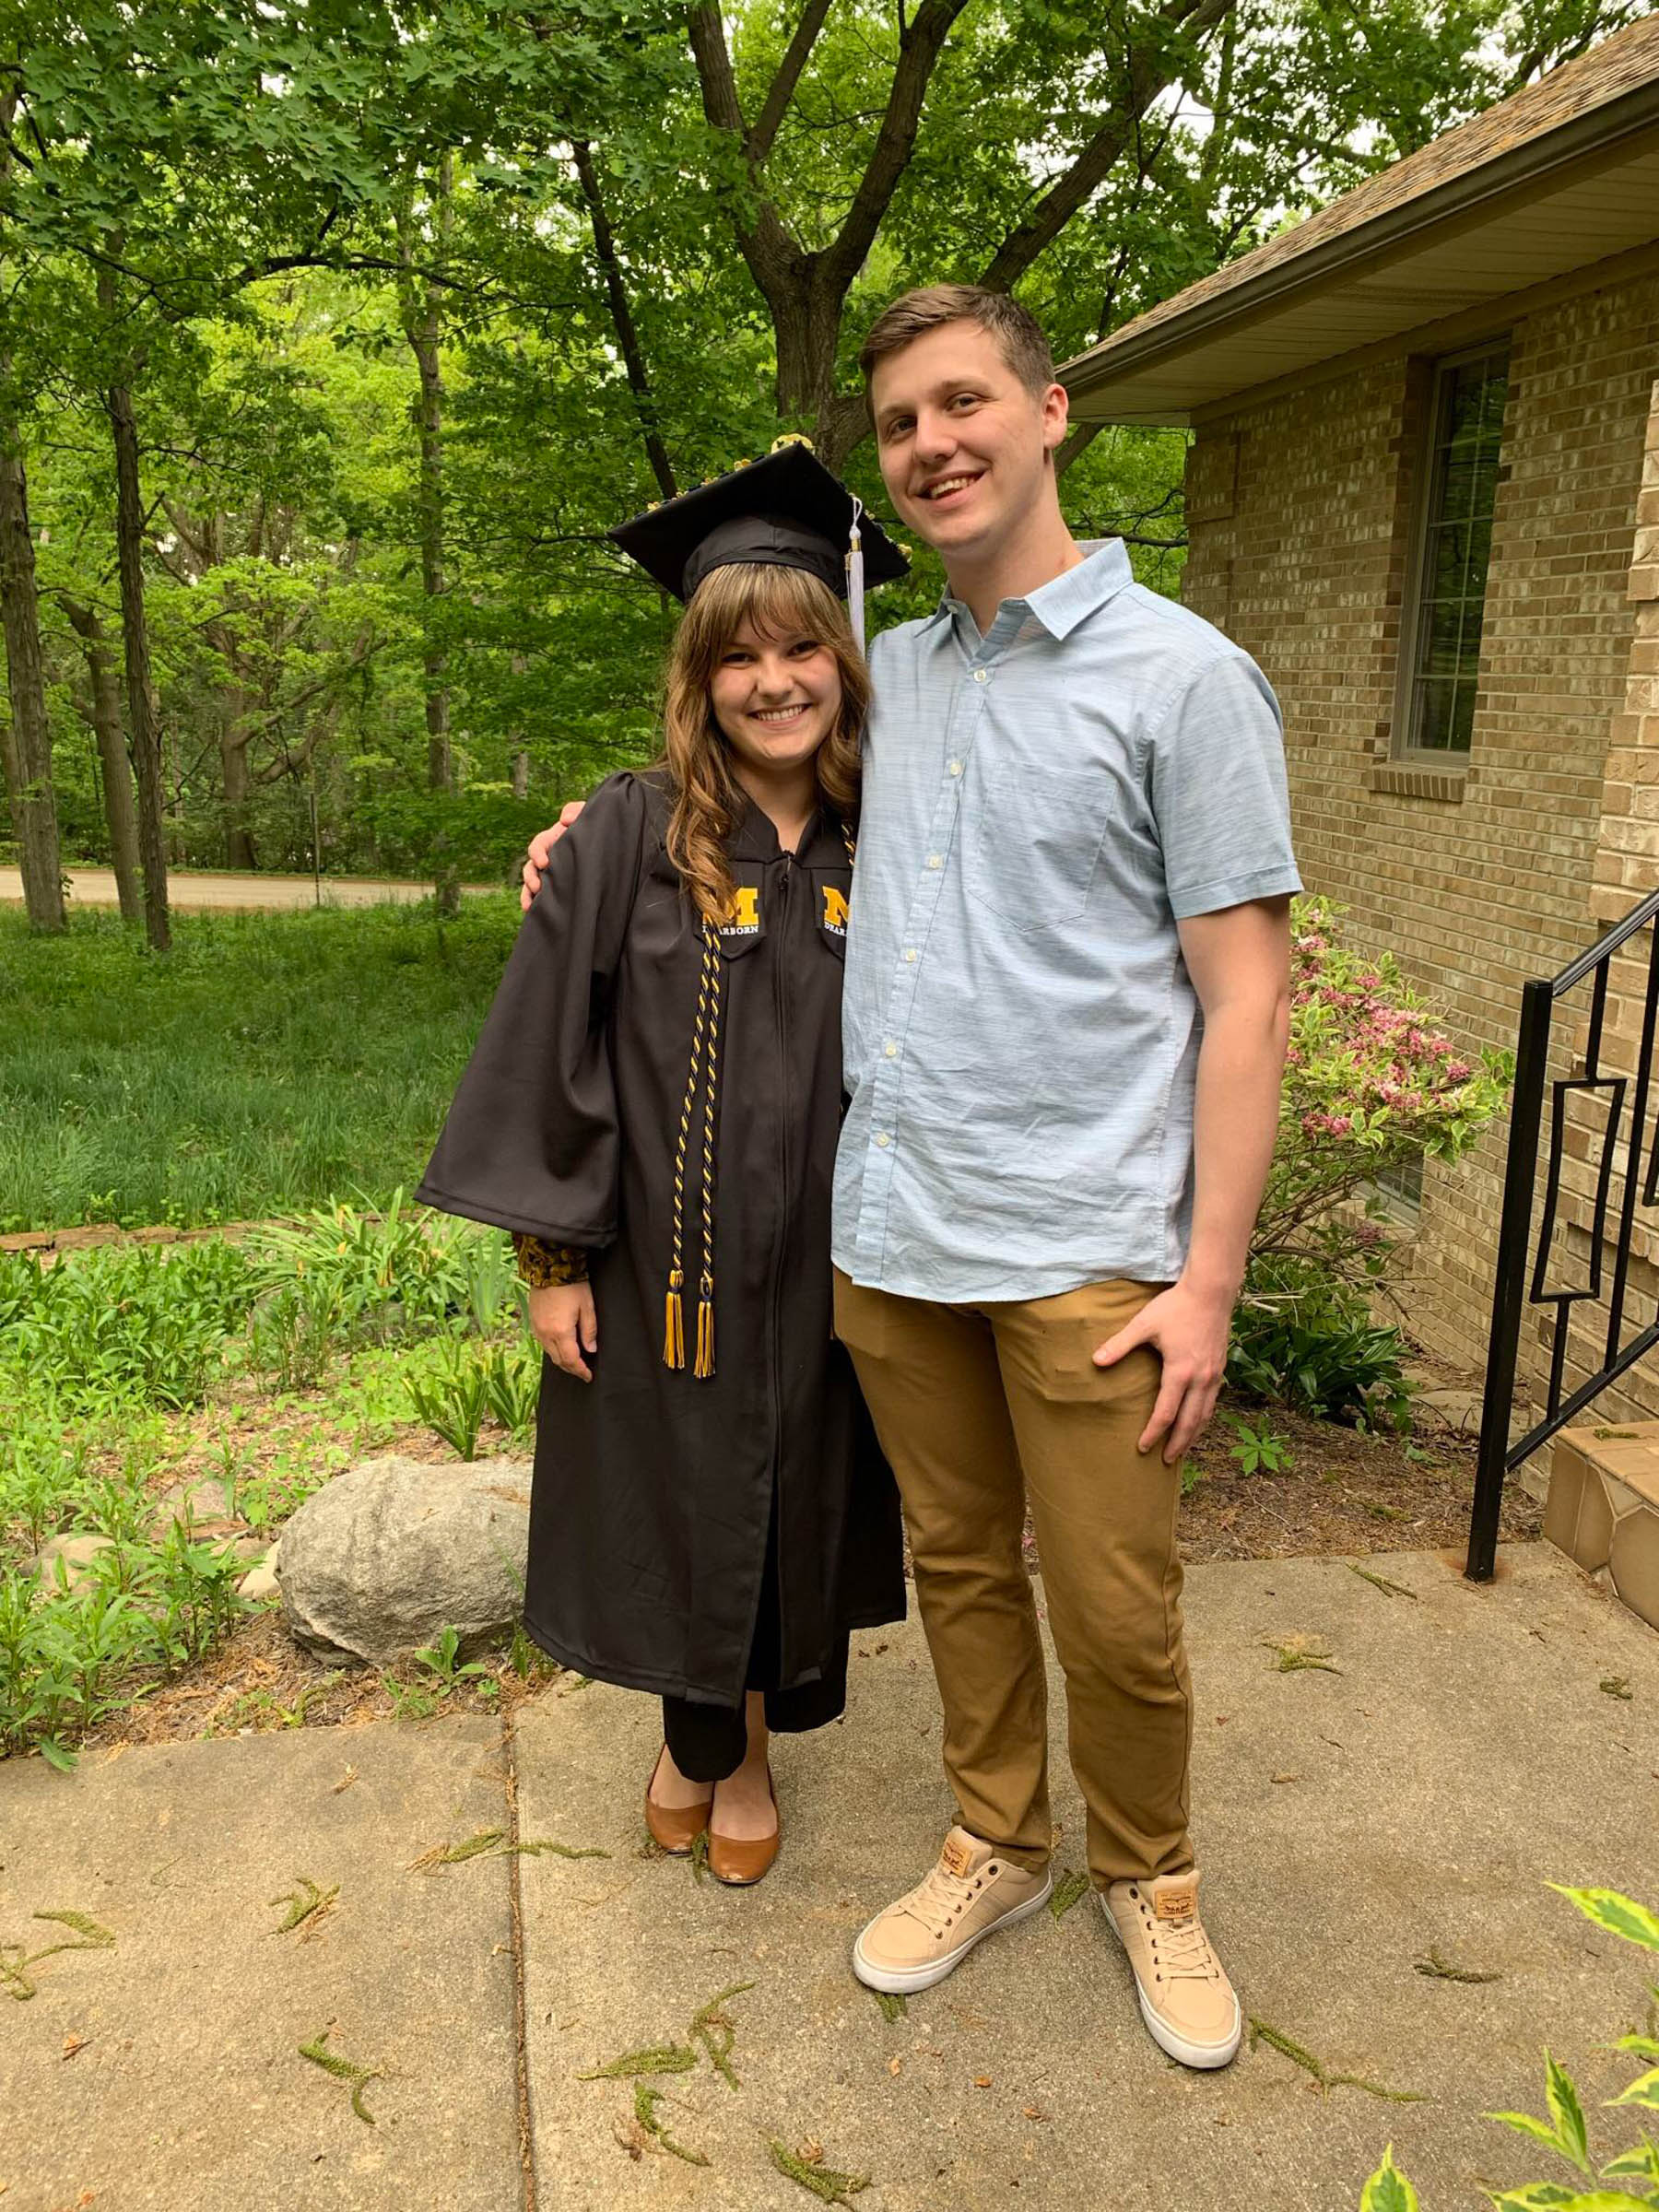 Gabrielle Weil and Alexander Cupps pose for a photo with Gabrielle wearing a cap and gown